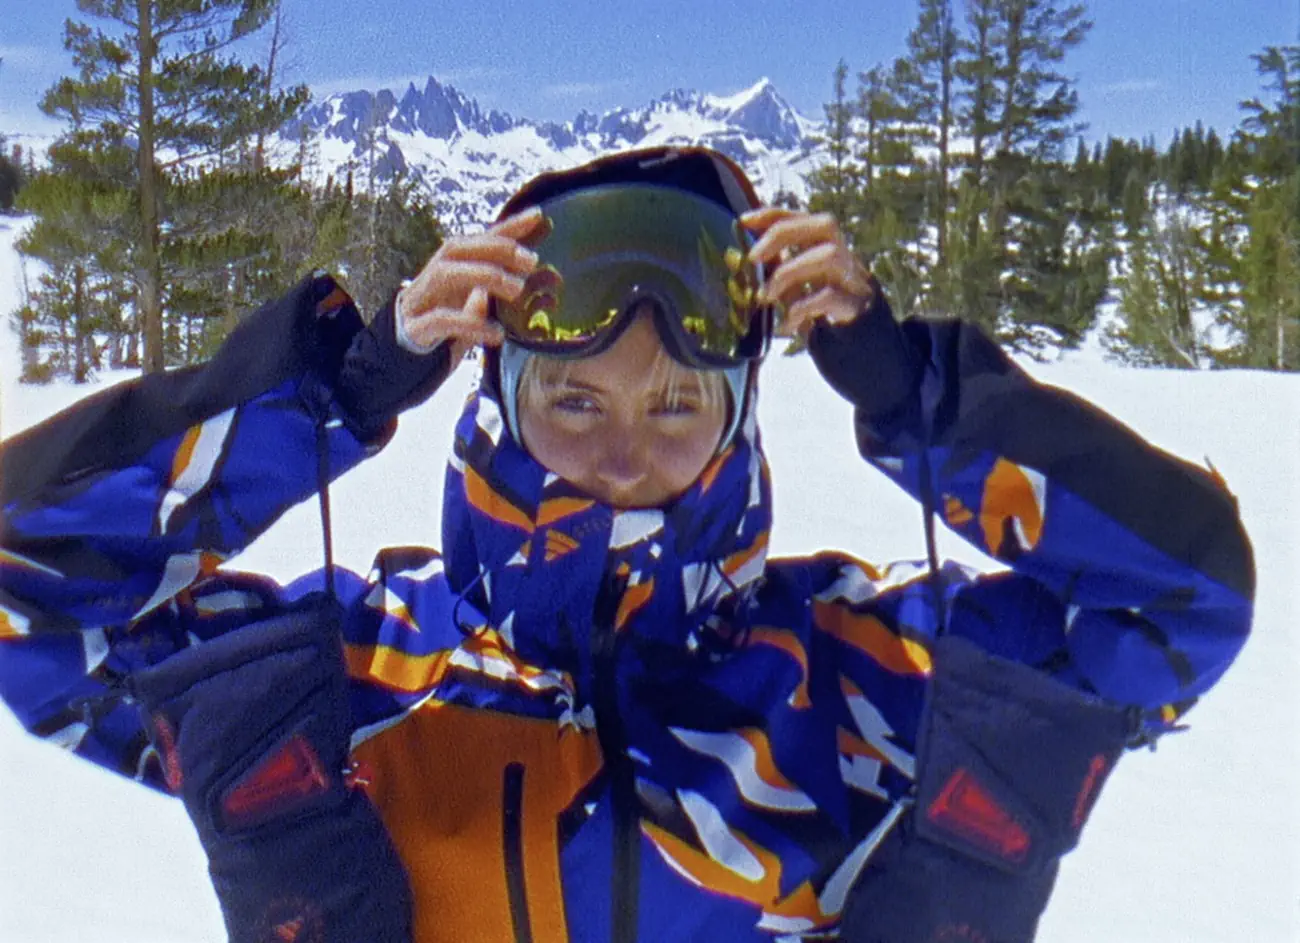 adidas by Stella McCartney debuts first-ever ski collection in collaboration with TERREX